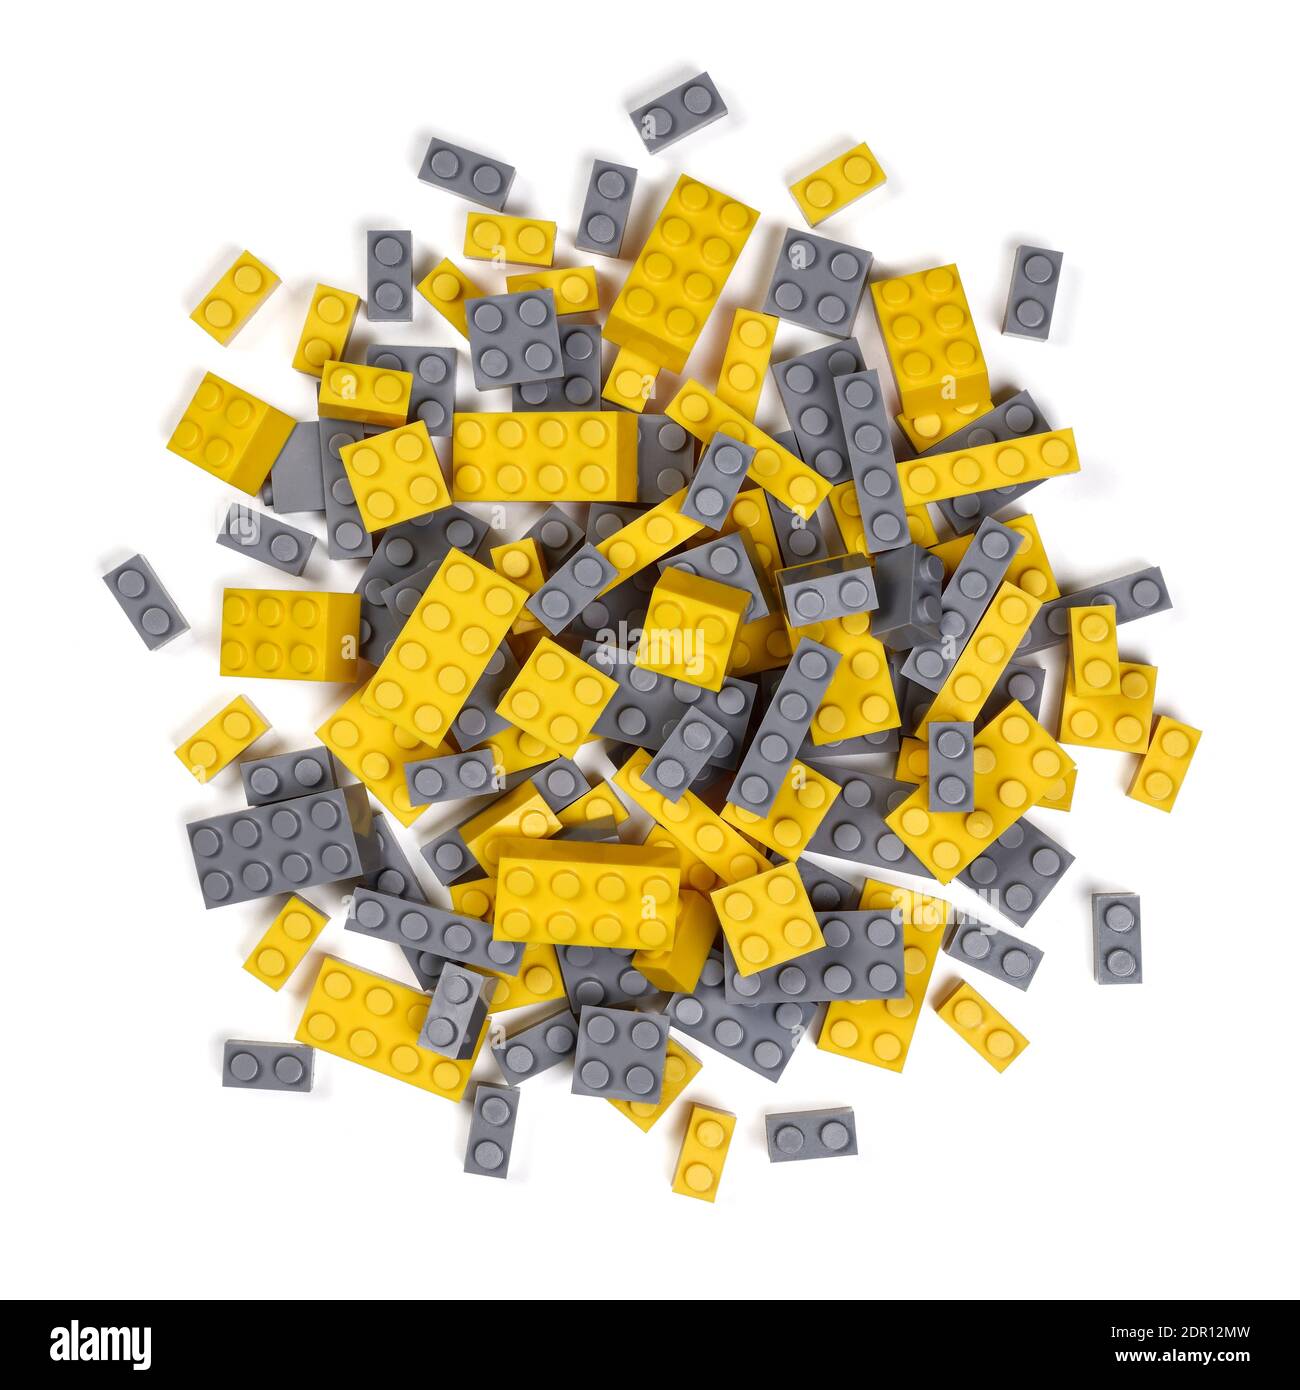 Overhead pile of plastic toy bricks in the Pantone colour of the year 2021 grey and yellow Stock Photo